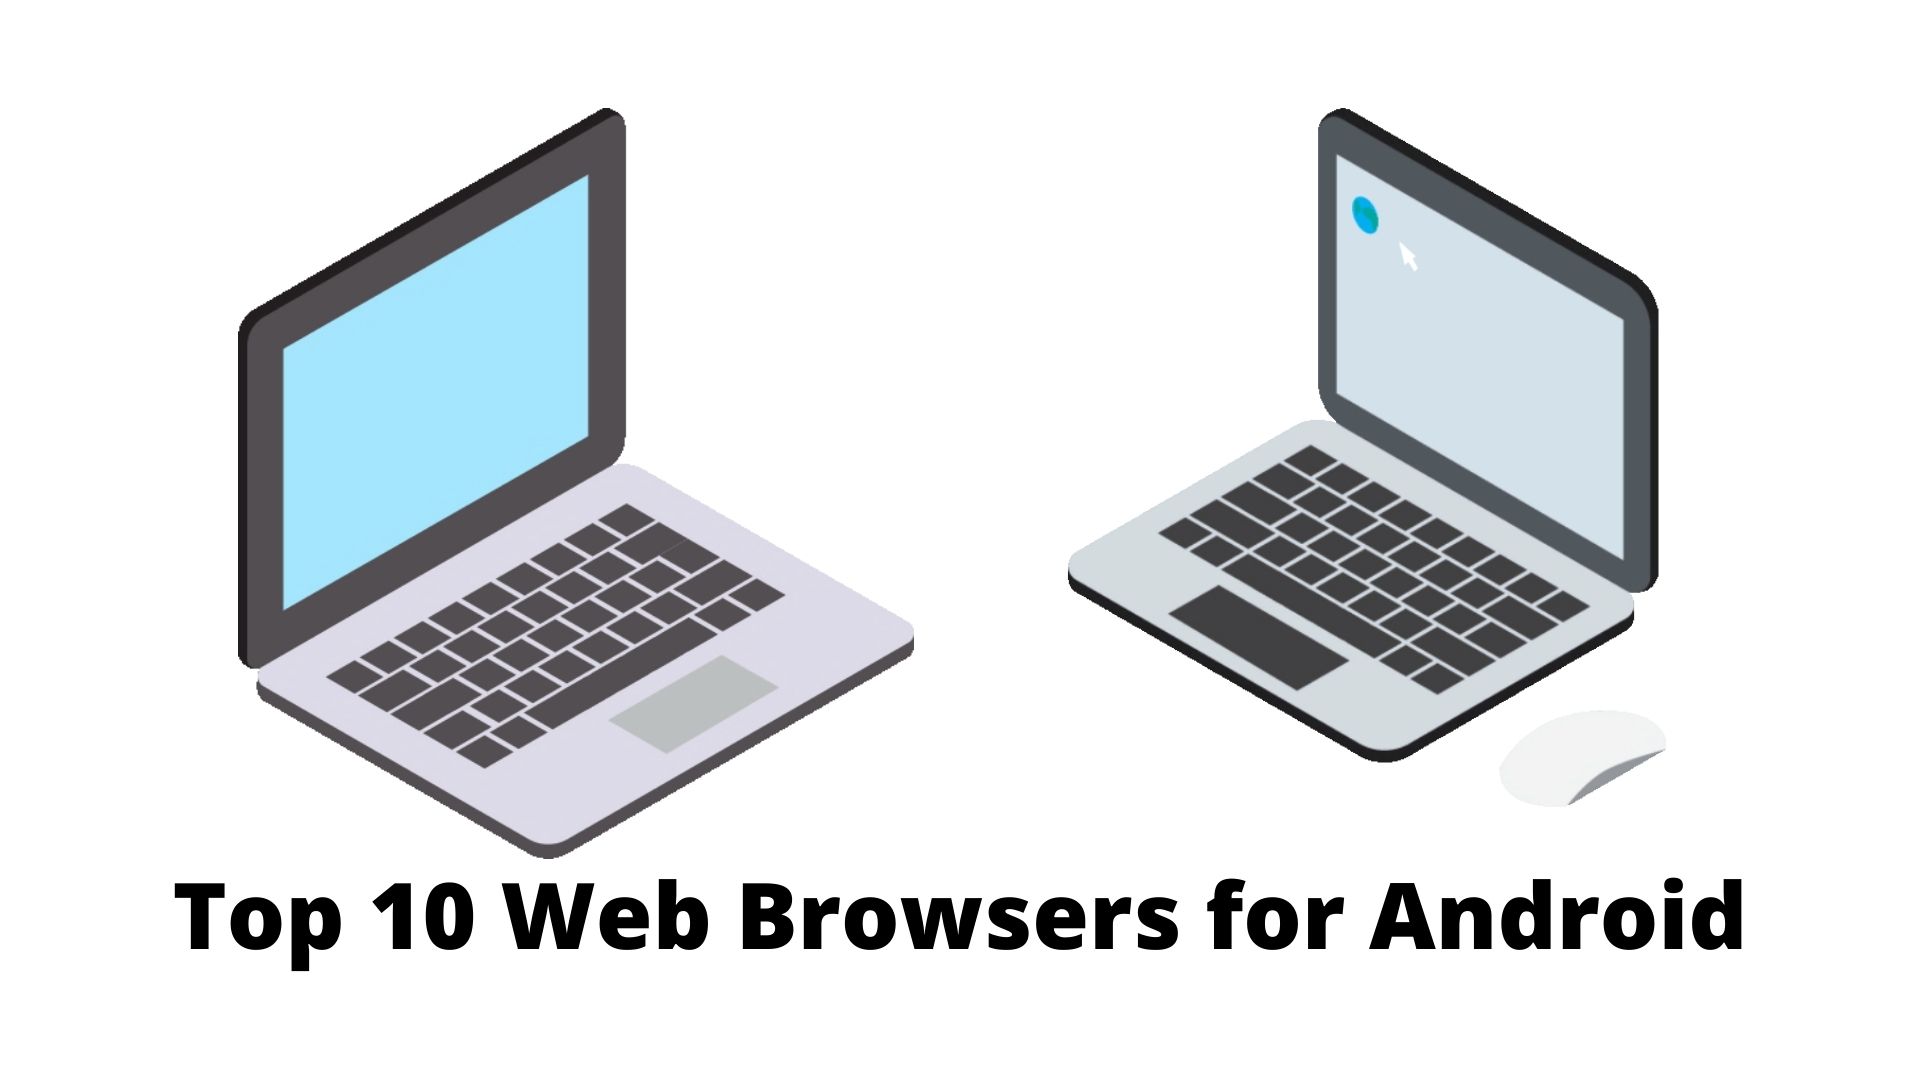 Top 10 Web Browsers for Android